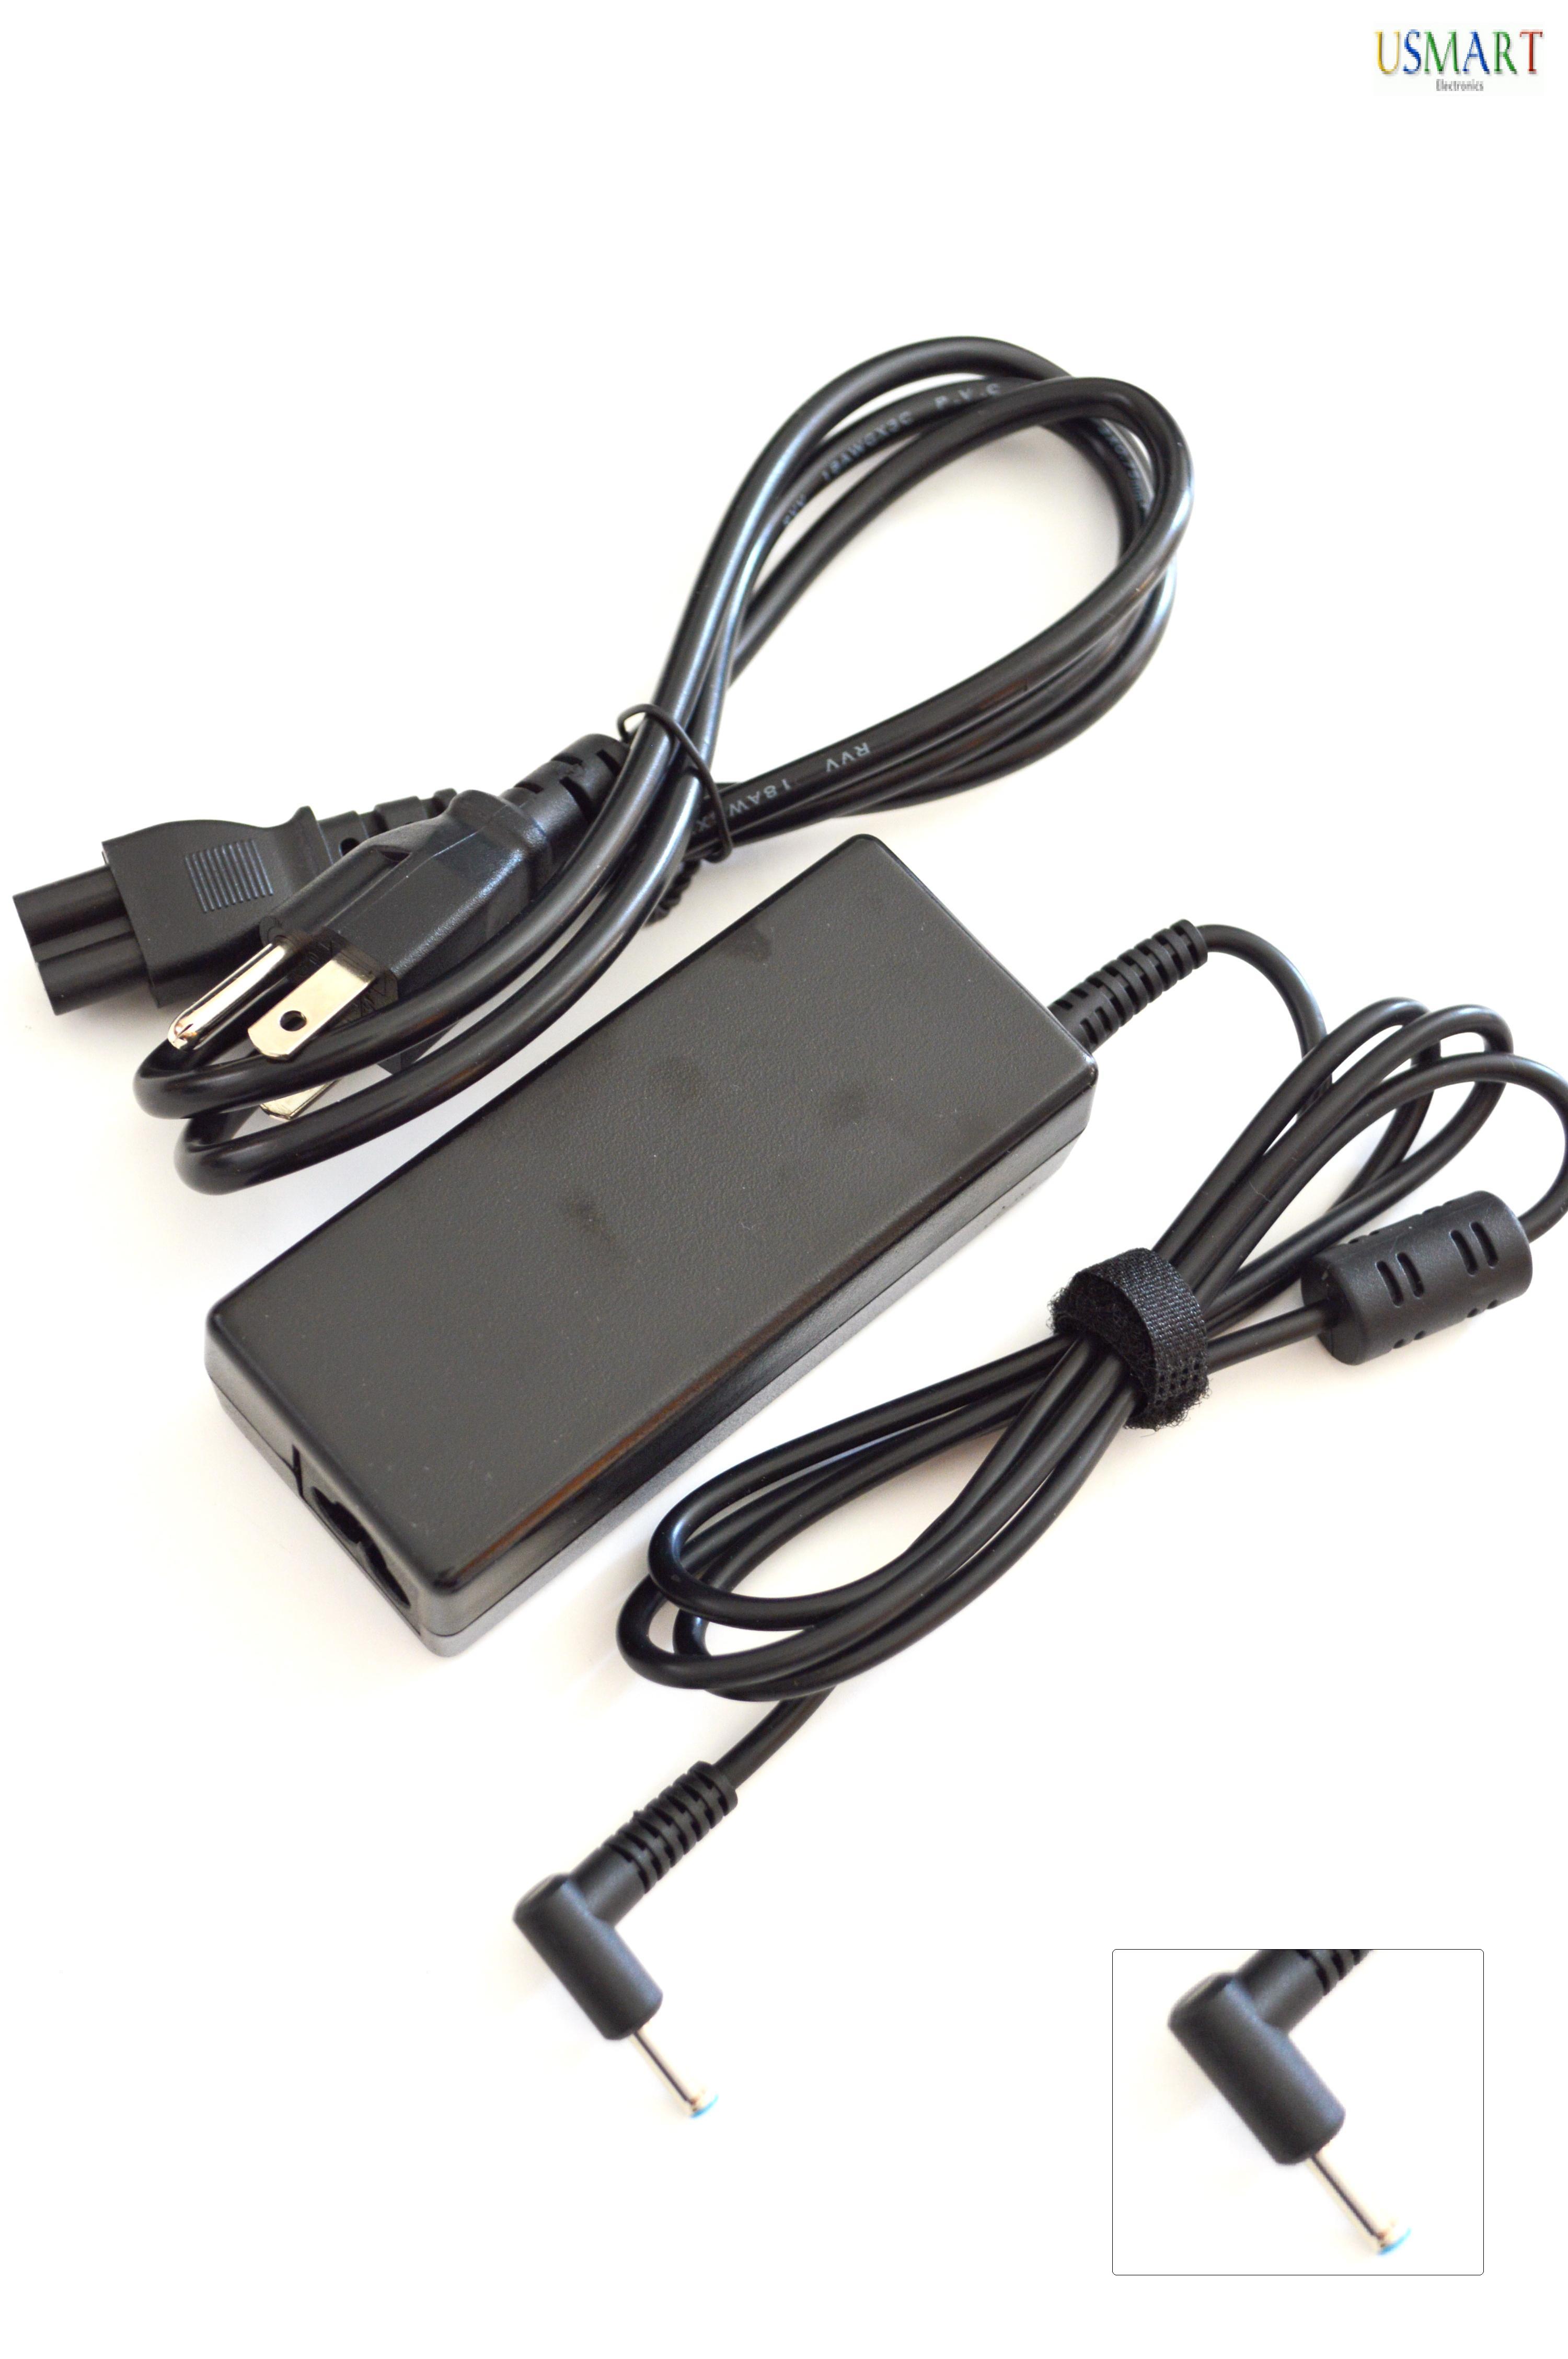 NEW Laptop Charger AC Adapter Power Supply For HP Split x2 13-m110dx, HP Split x2 13-m210dx Laptop PC Notebook Chromebook Tablets Power Supply Cord - image 1 of 3